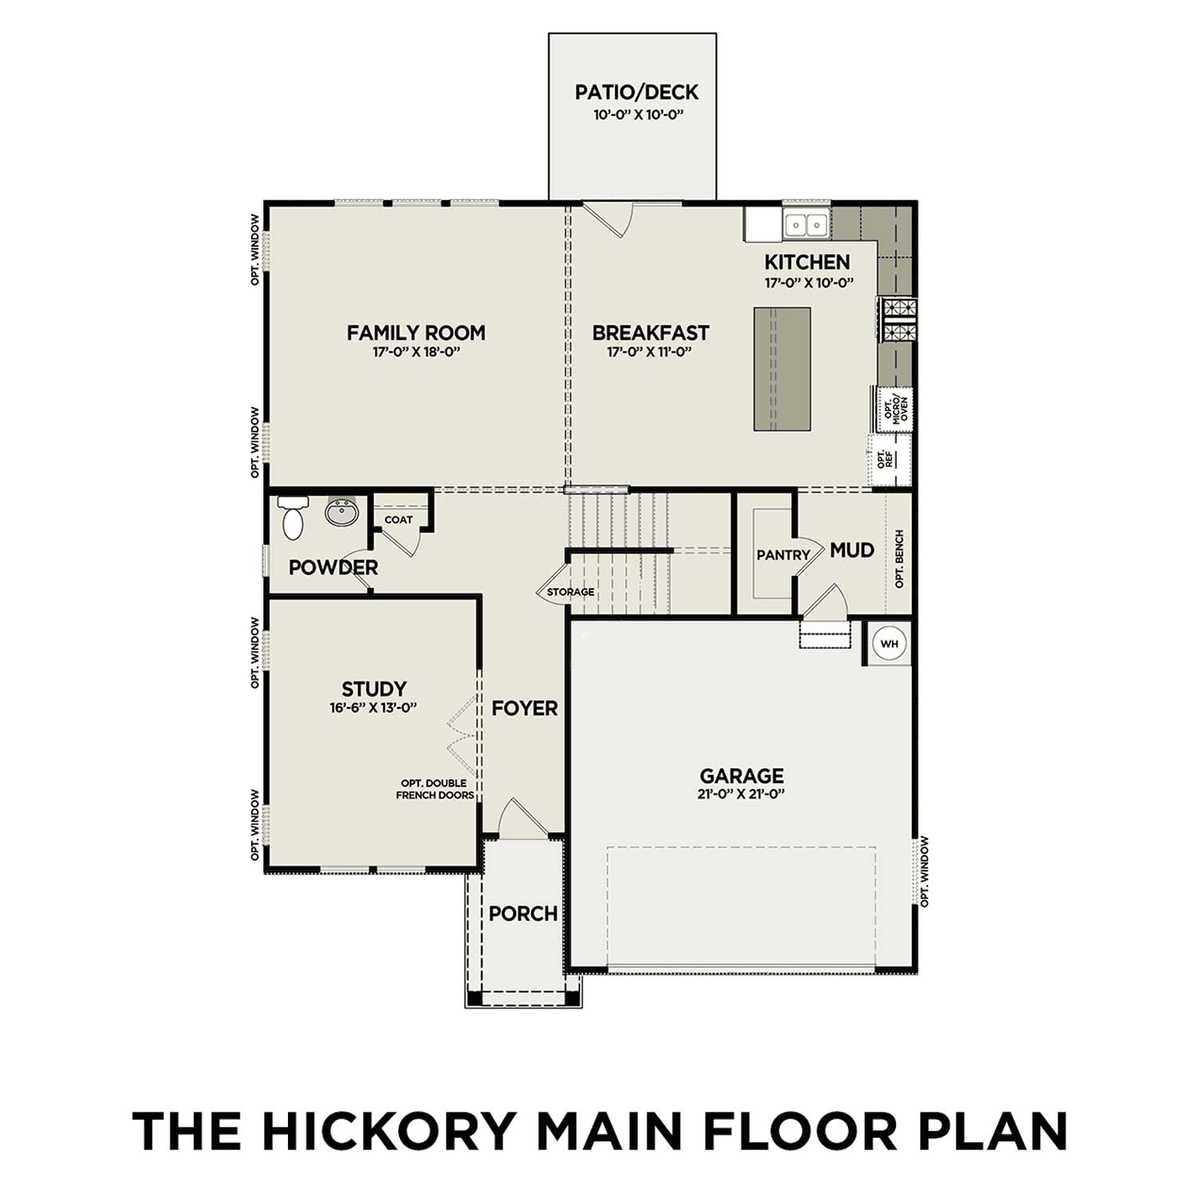 1 - The Hickory B floor plan layout for 473 Black Walnut Drive in Davidson Homes' Carellton community.